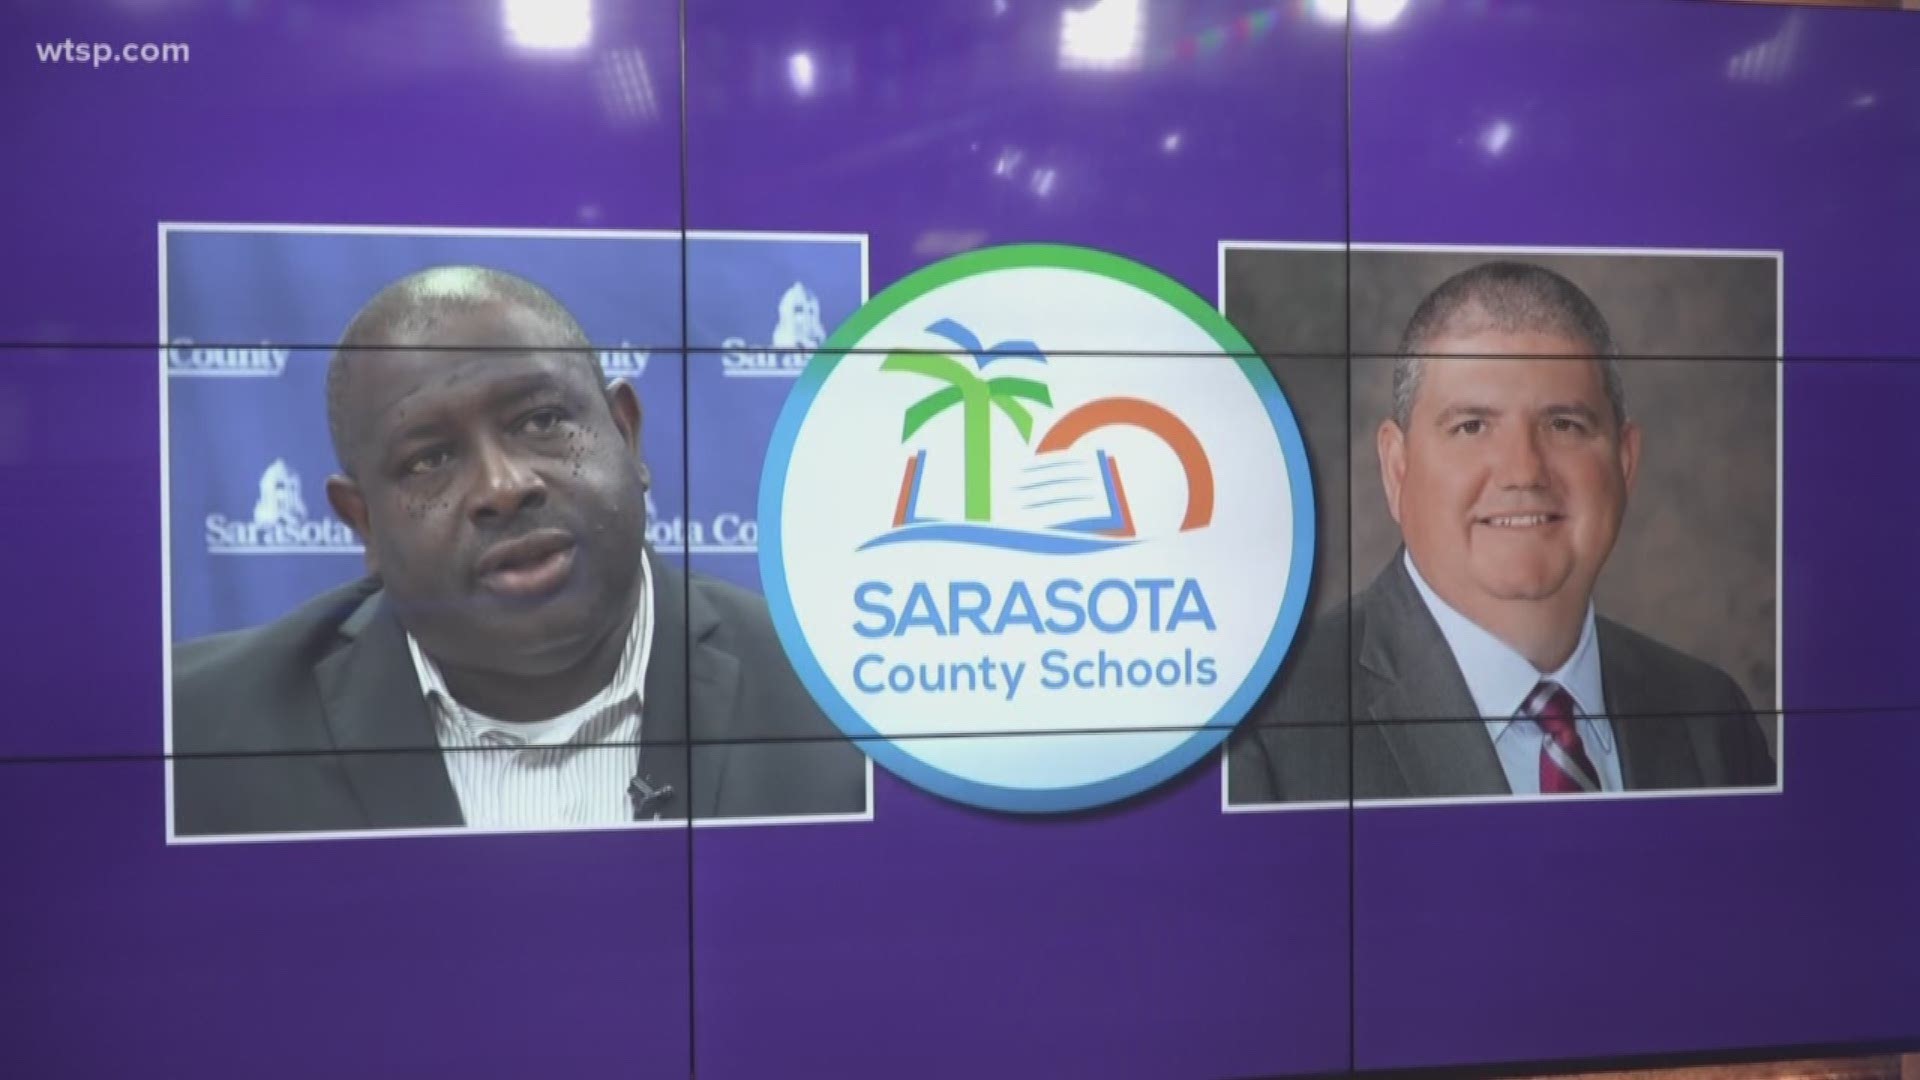 In the midst of compounding drama within Sarasota County Schools, the teachers union put up a sign that takes a shot at the superintendent. https://bit.ly/2Py6vM3